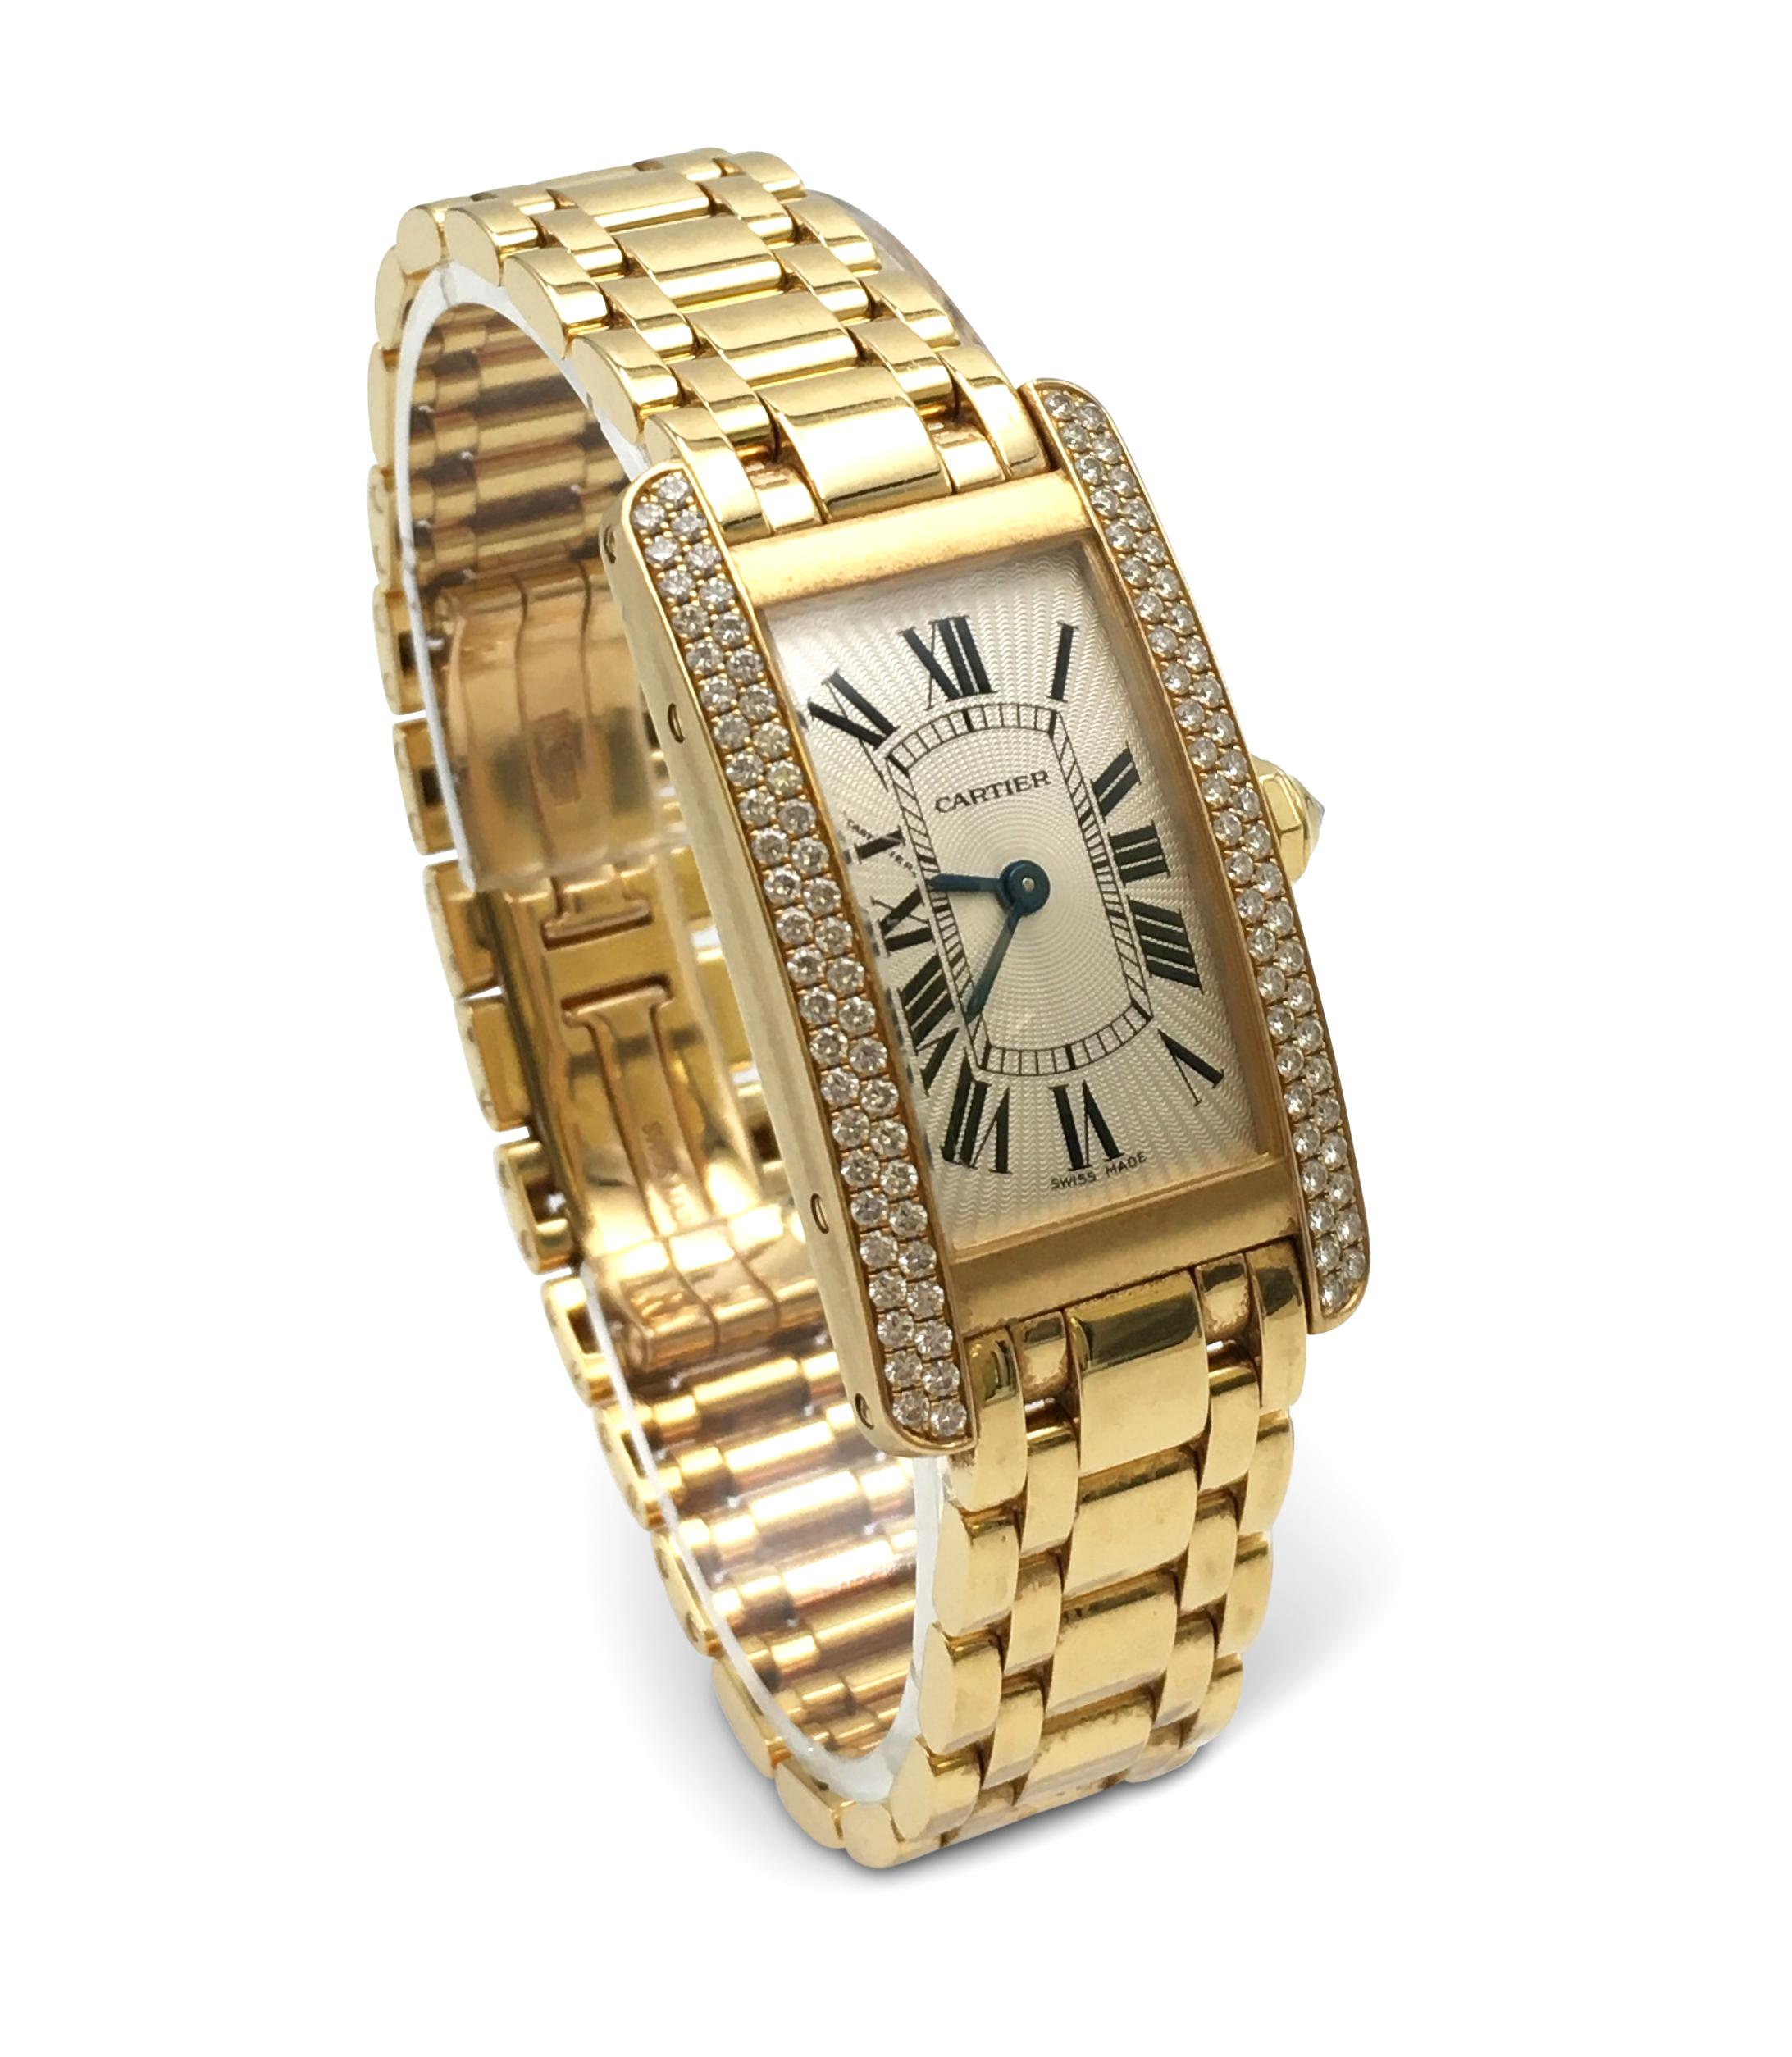 Authentic Cartier Tank Americaine wristwatch made in 18 karat yellow gold with approximately 99 round cut diamonds.  The case measures 19 x 34mm and is set with 4 screws, sapphire crystal. CIRCA 2010's.  The watch is accompanied by its original